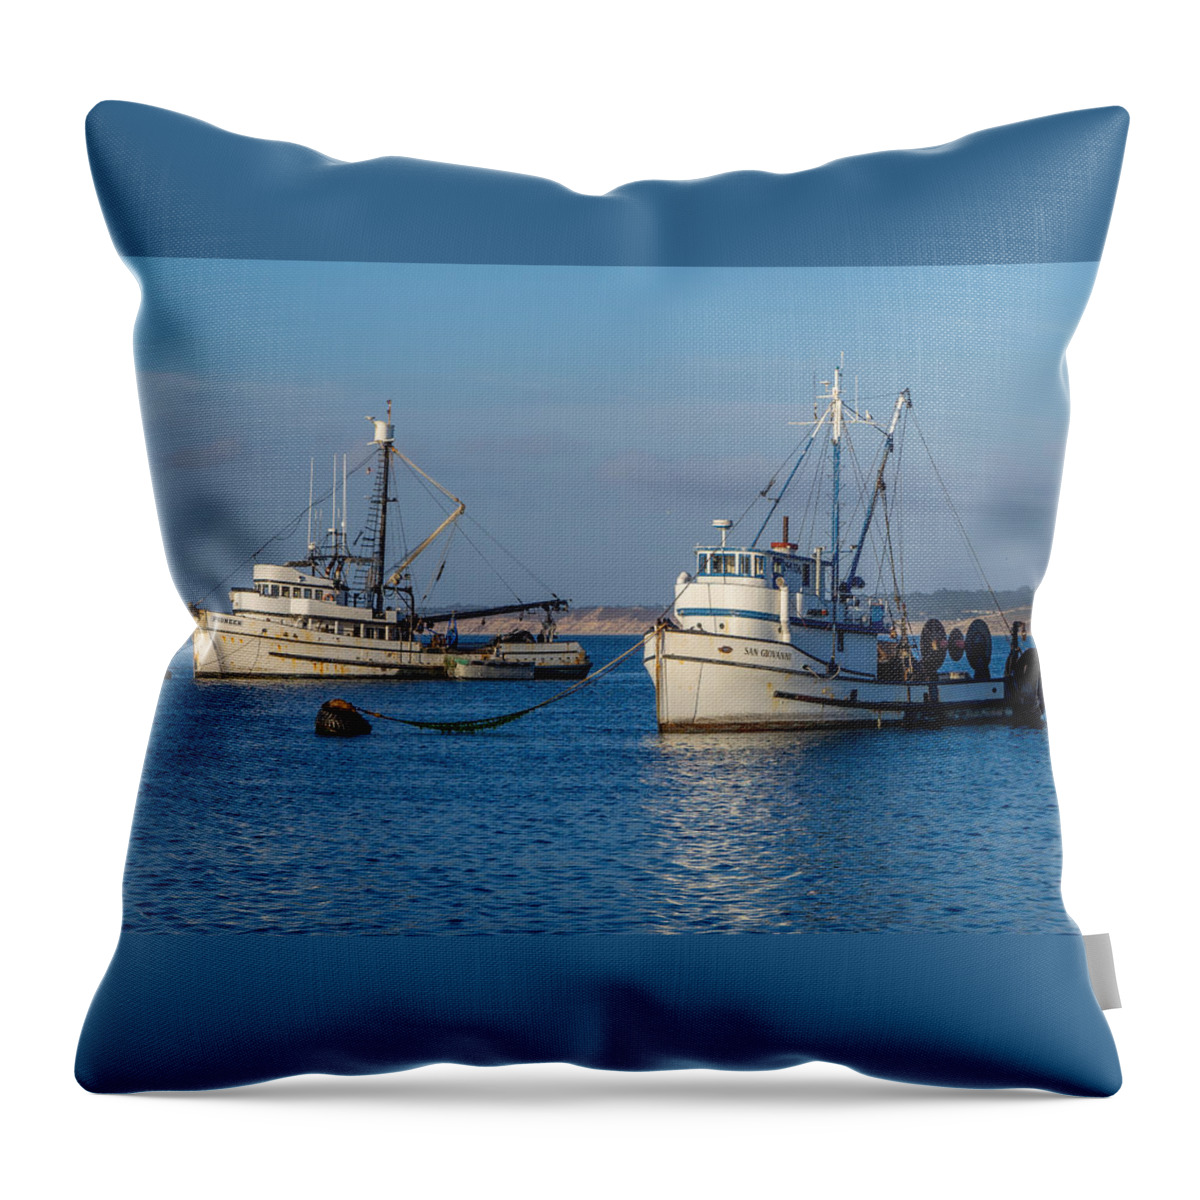 Monterey Throw Pillow featuring the photograph Monterey Fishing Boats by Derek Dean